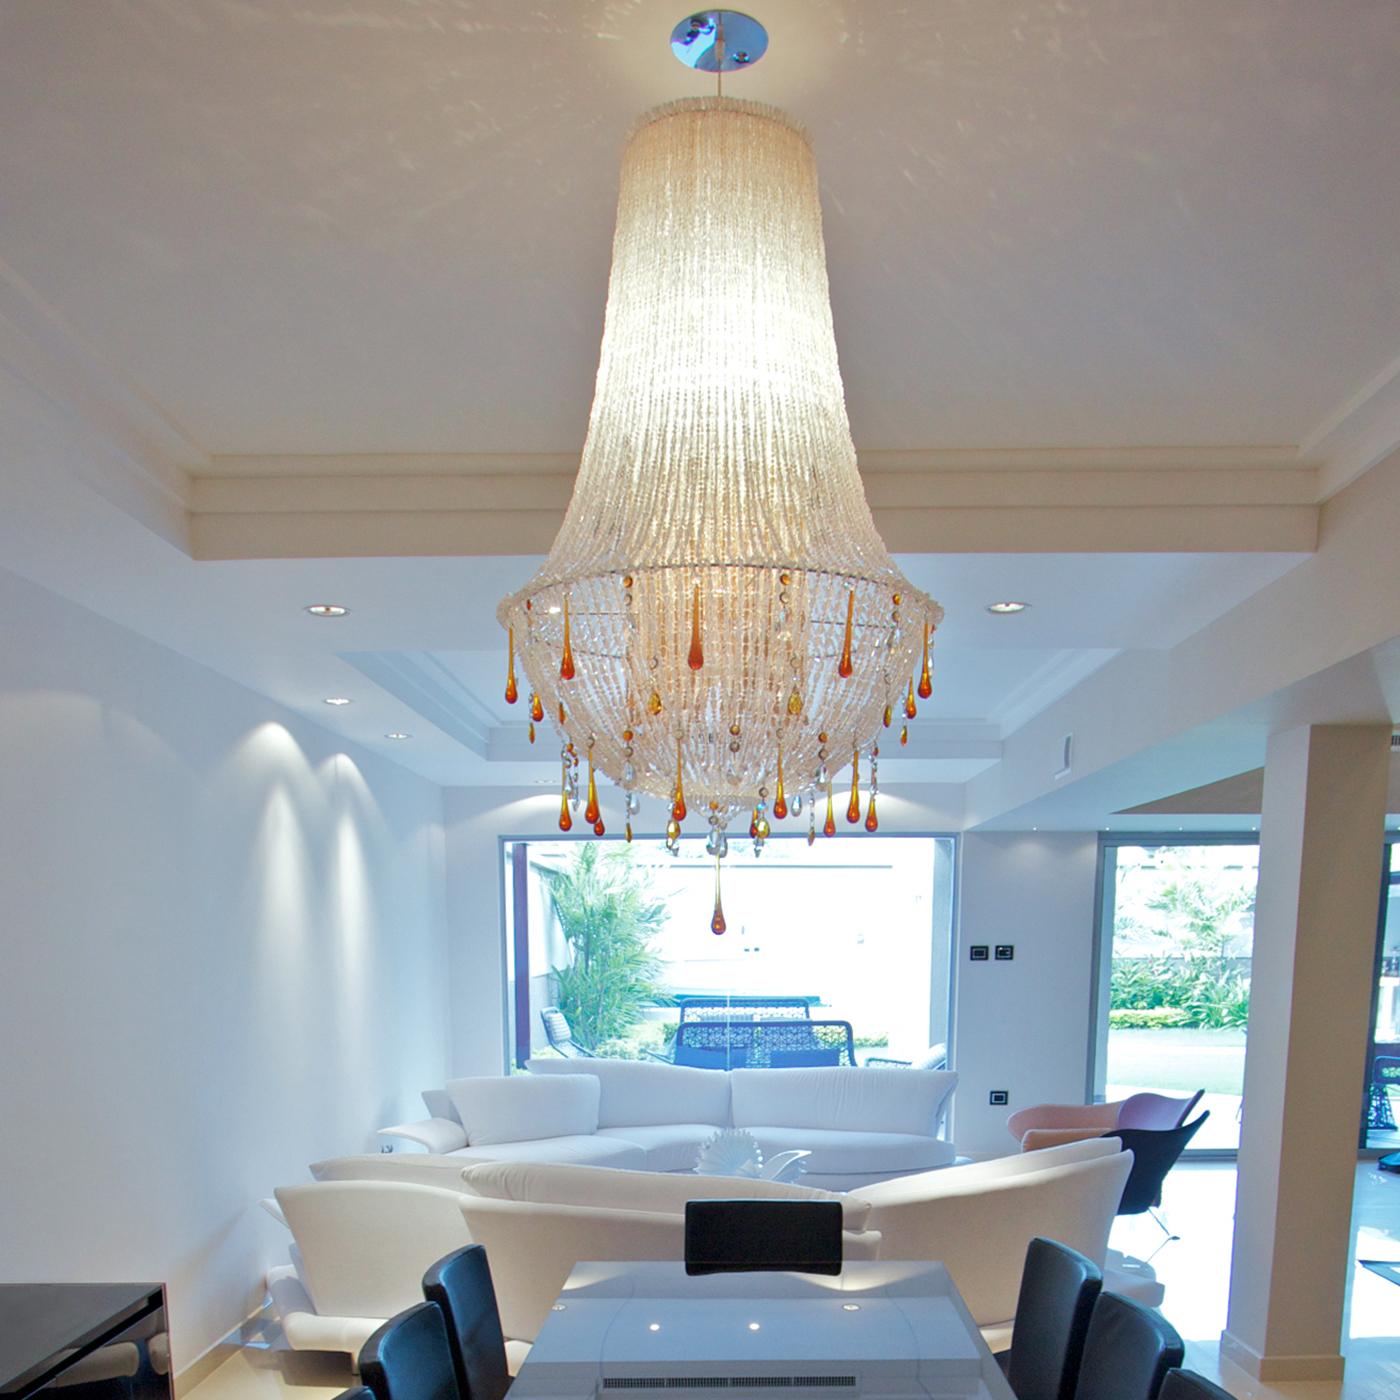 Imbuing rooms with its sumptuous yet elegant flair, this minutely handcrafted pendant lamp is distinguished by a flared silhouette made of strands of transparent beads in methacrylate and prized, teardrop-like pendants in amber-colored glass and